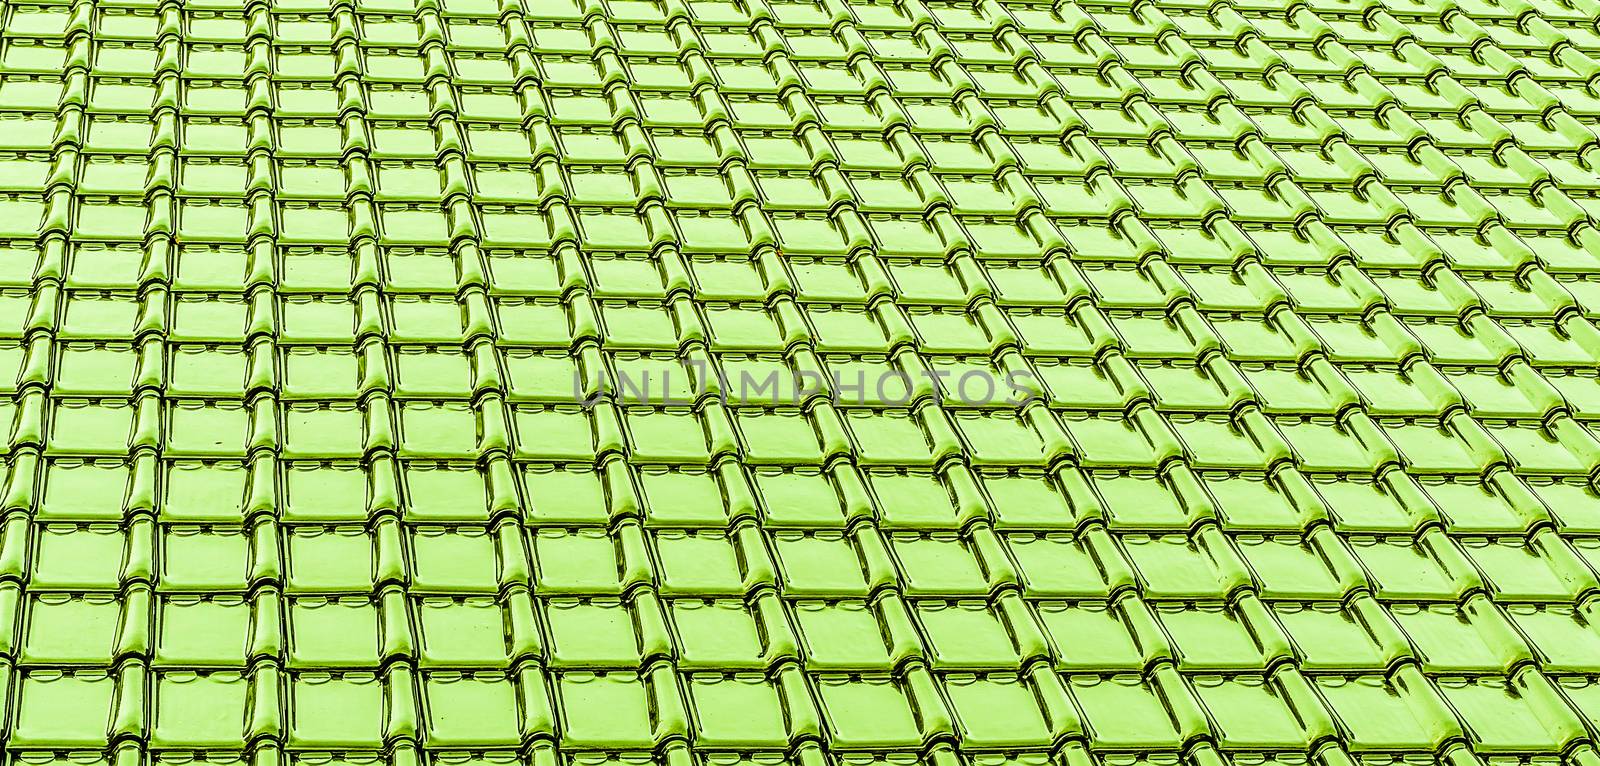 modern lime green glossy rooftop tiling texture background by charlottebleijenberg